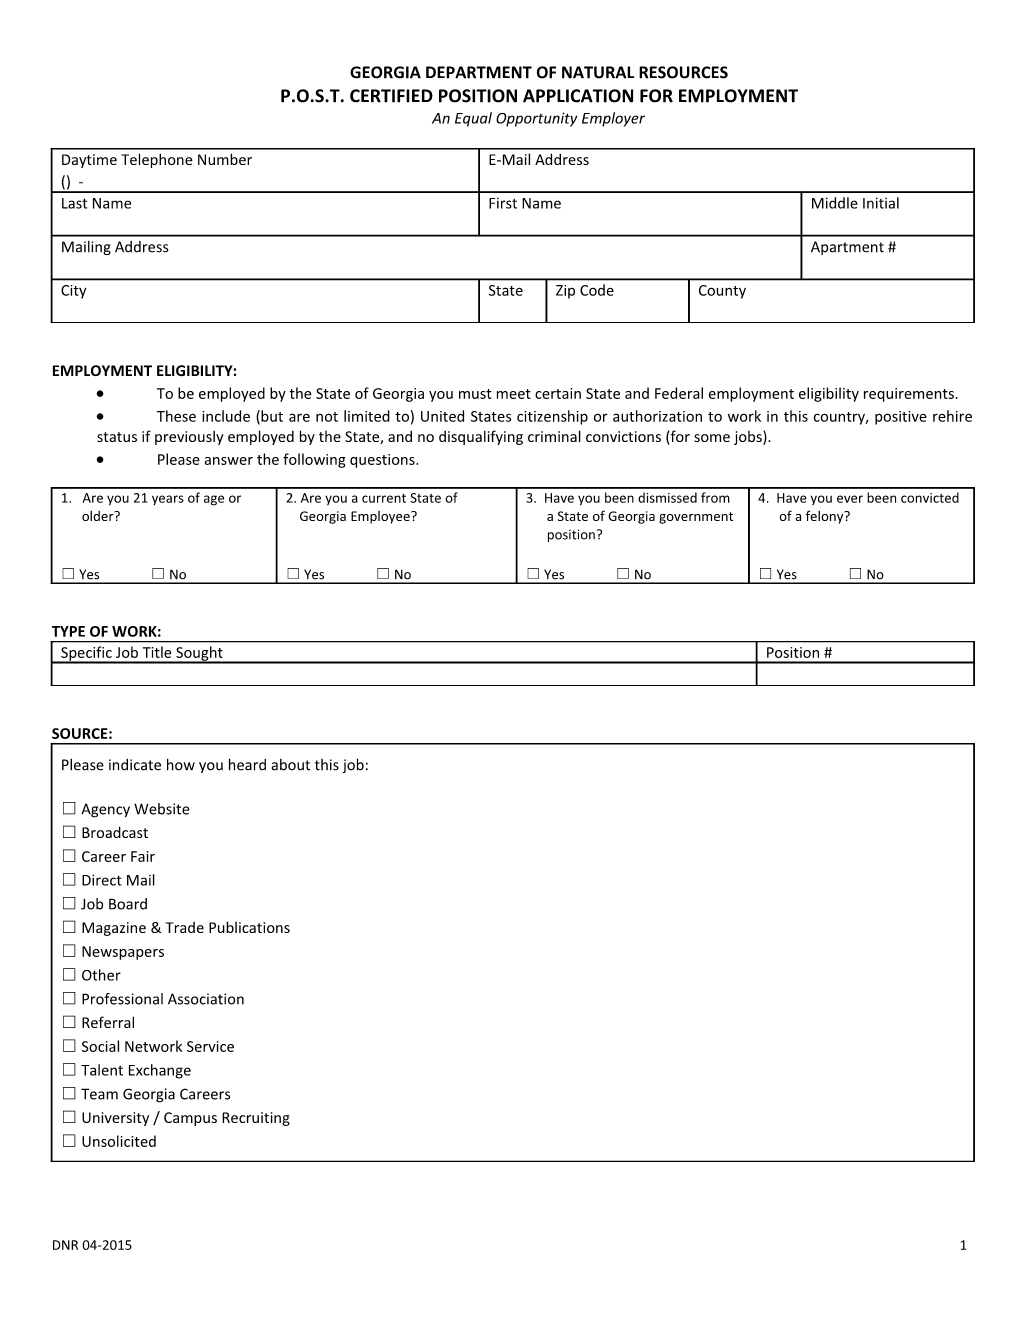 P.O.S.T. Certified Position Application for Employment